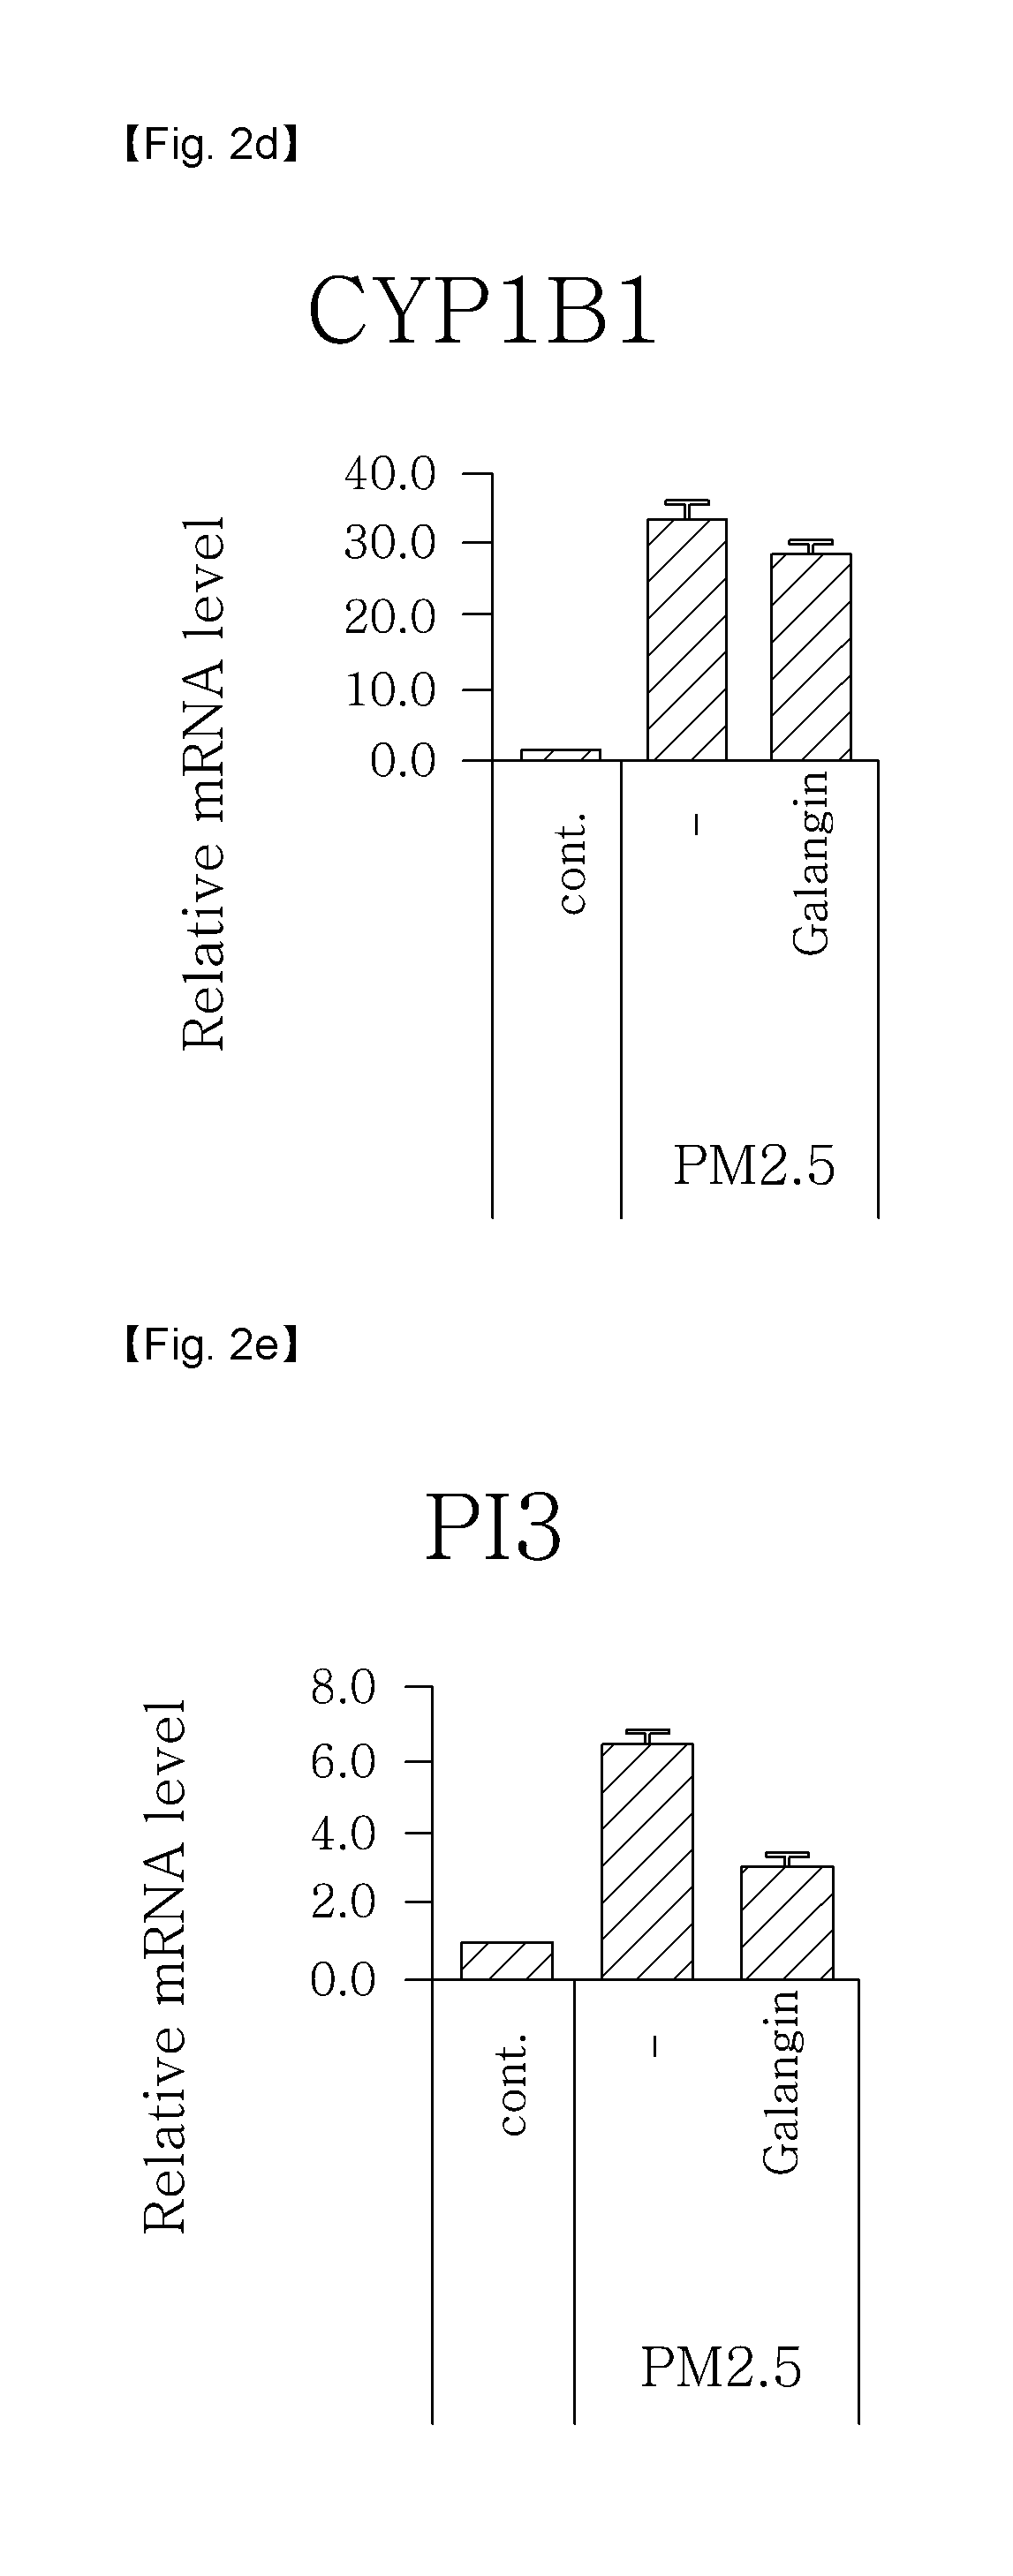 Composition for diagnosing skin damage caused by fine dust, and composition comprising galangin as active ingredient